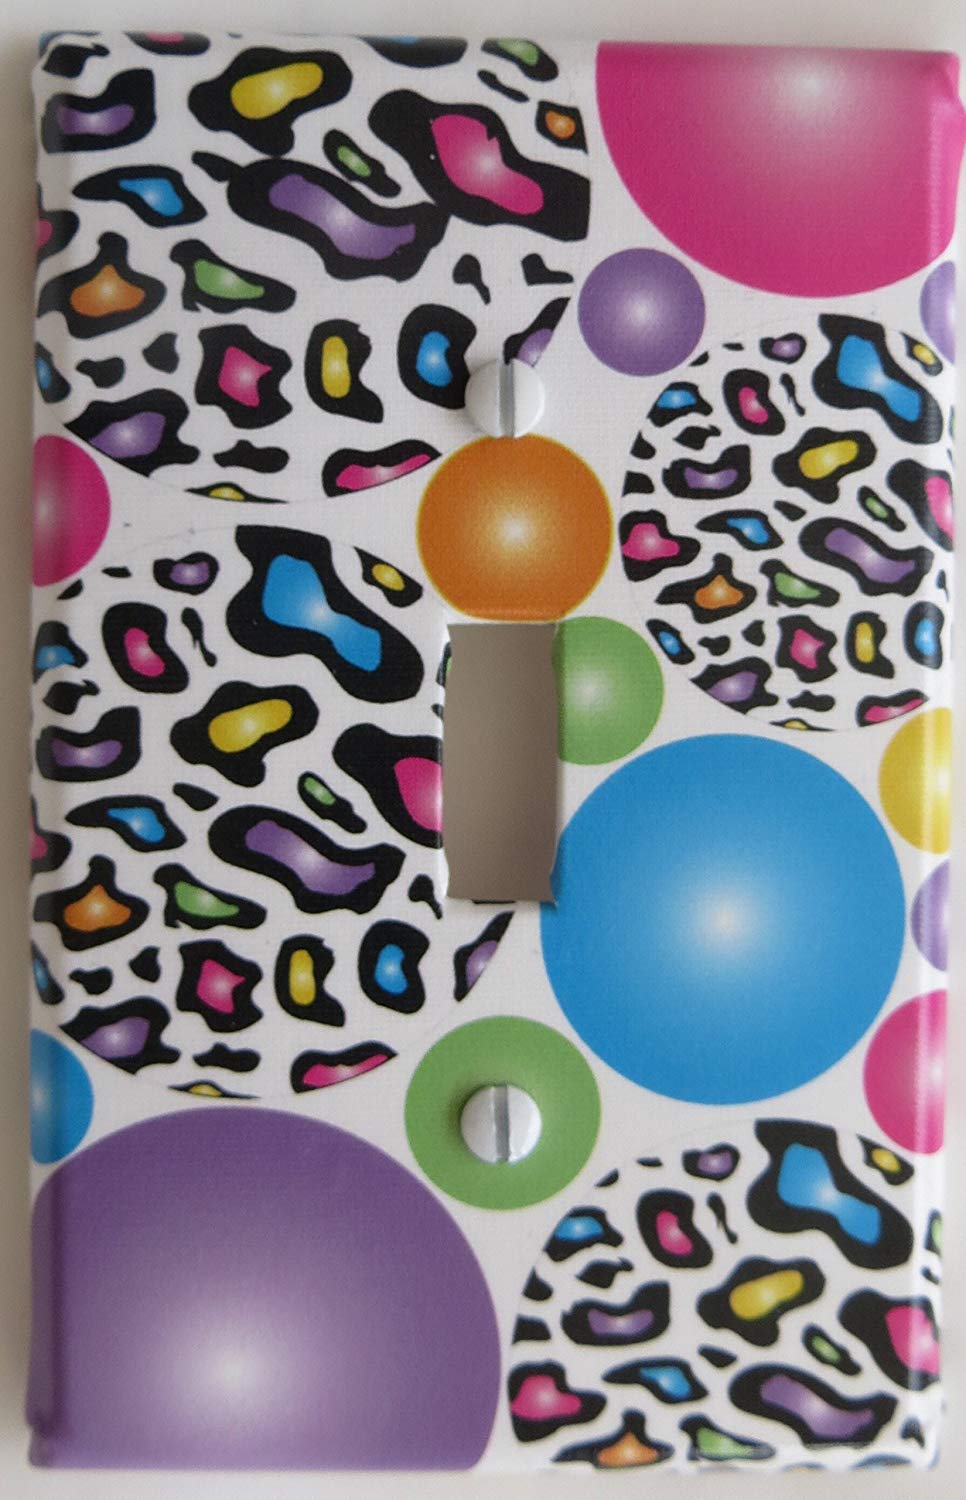 Leopard Print Light Switch Plates Multicolored Rainbow Dots in Blue, Pink, Yellow, Green, and Purple Leopard Dots